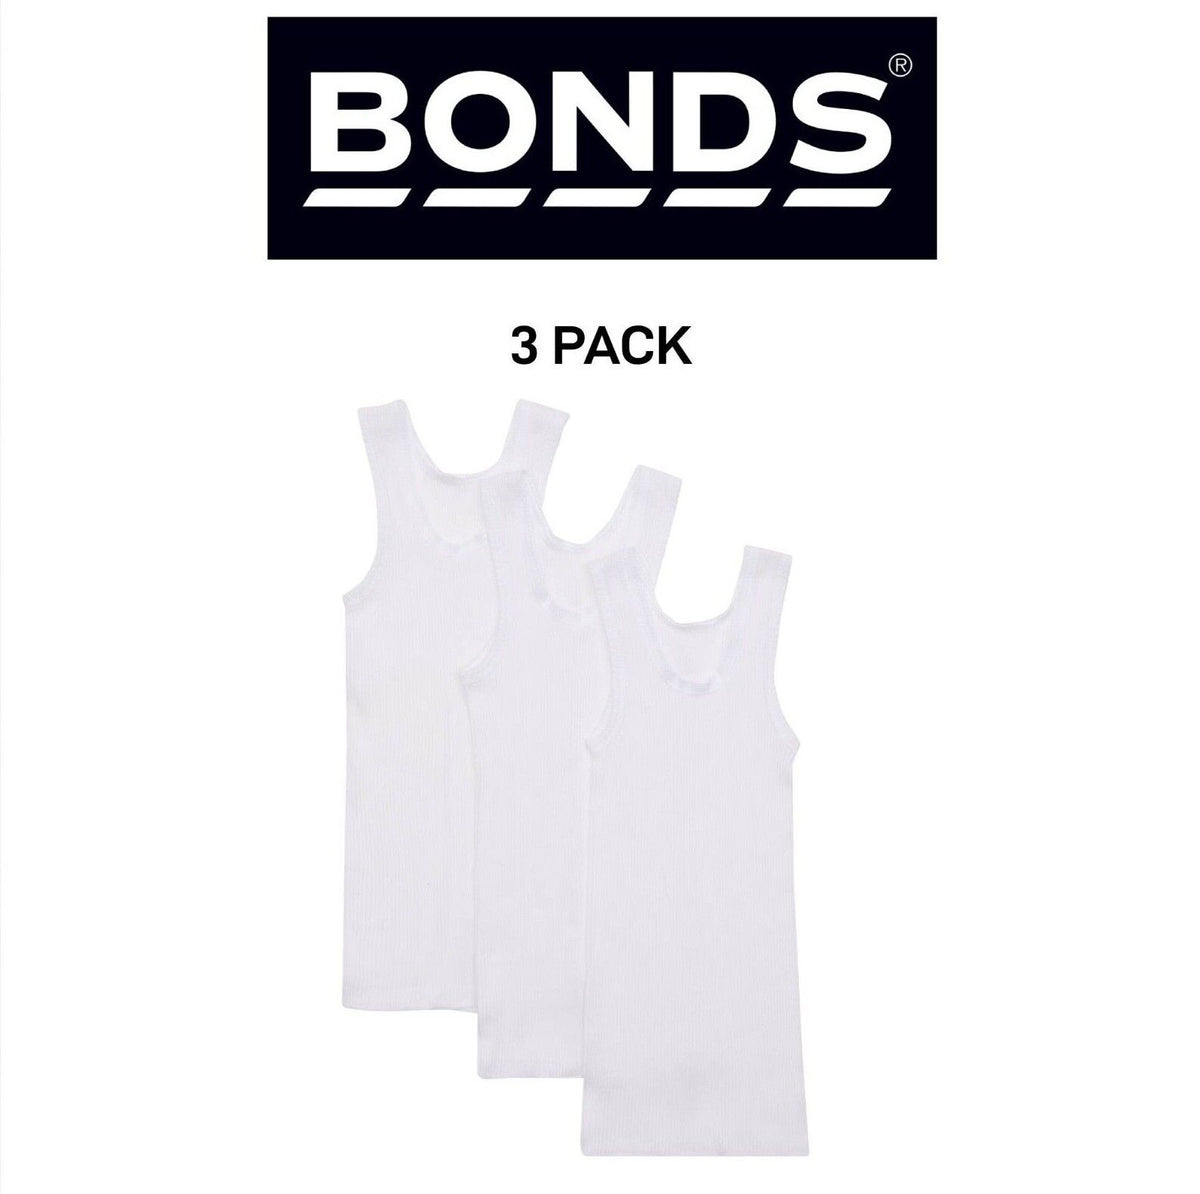 Bonds Baby Vest Extra Warmth & Comfort with Side Seamfree 3 Pack BXHNT